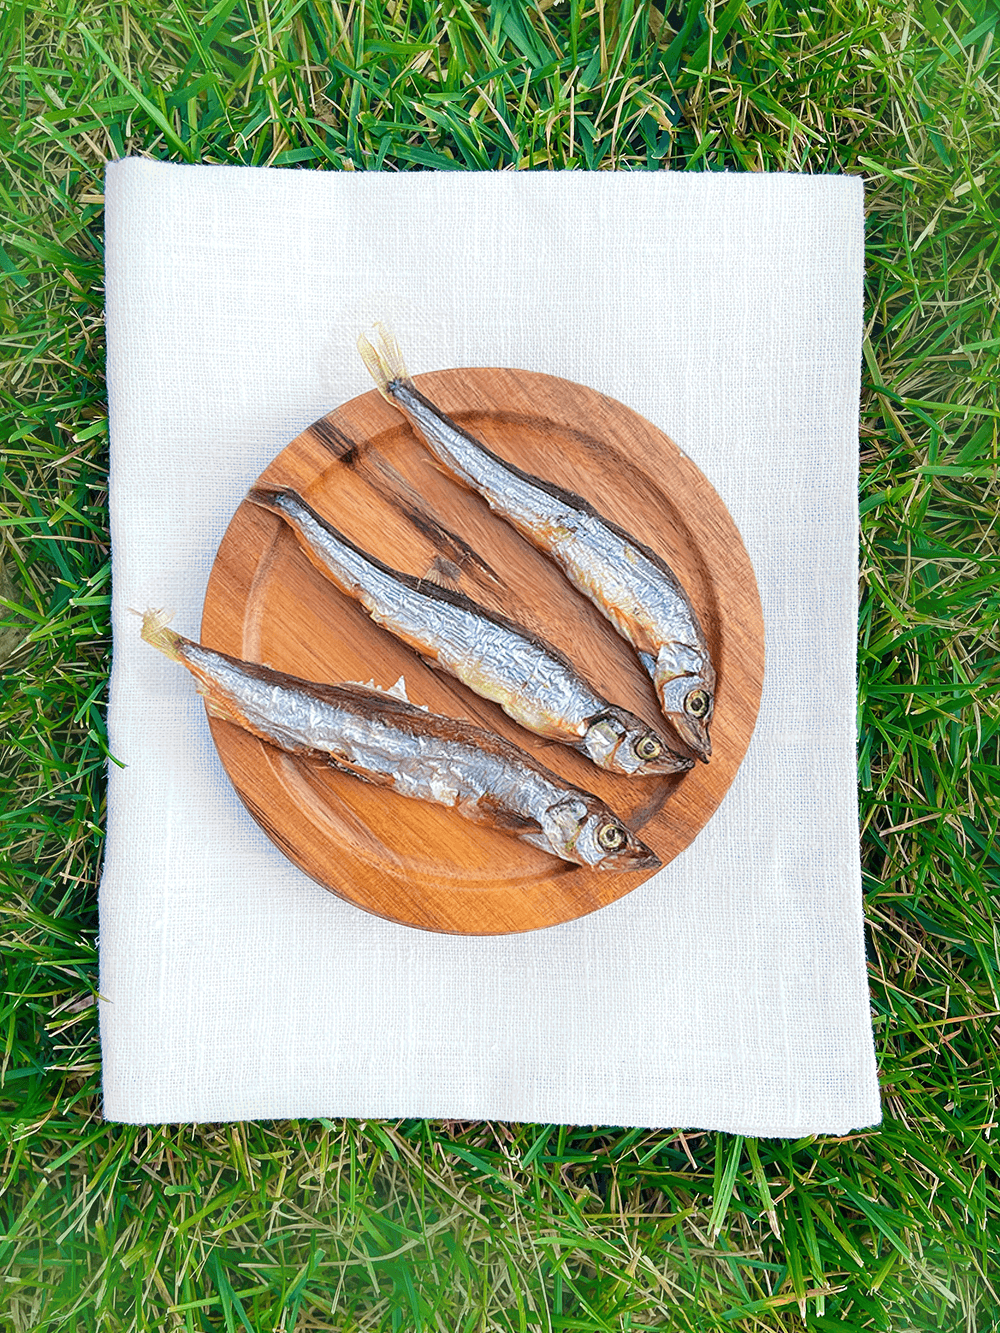 7824-capelin-dehydrated-dog-treats.png